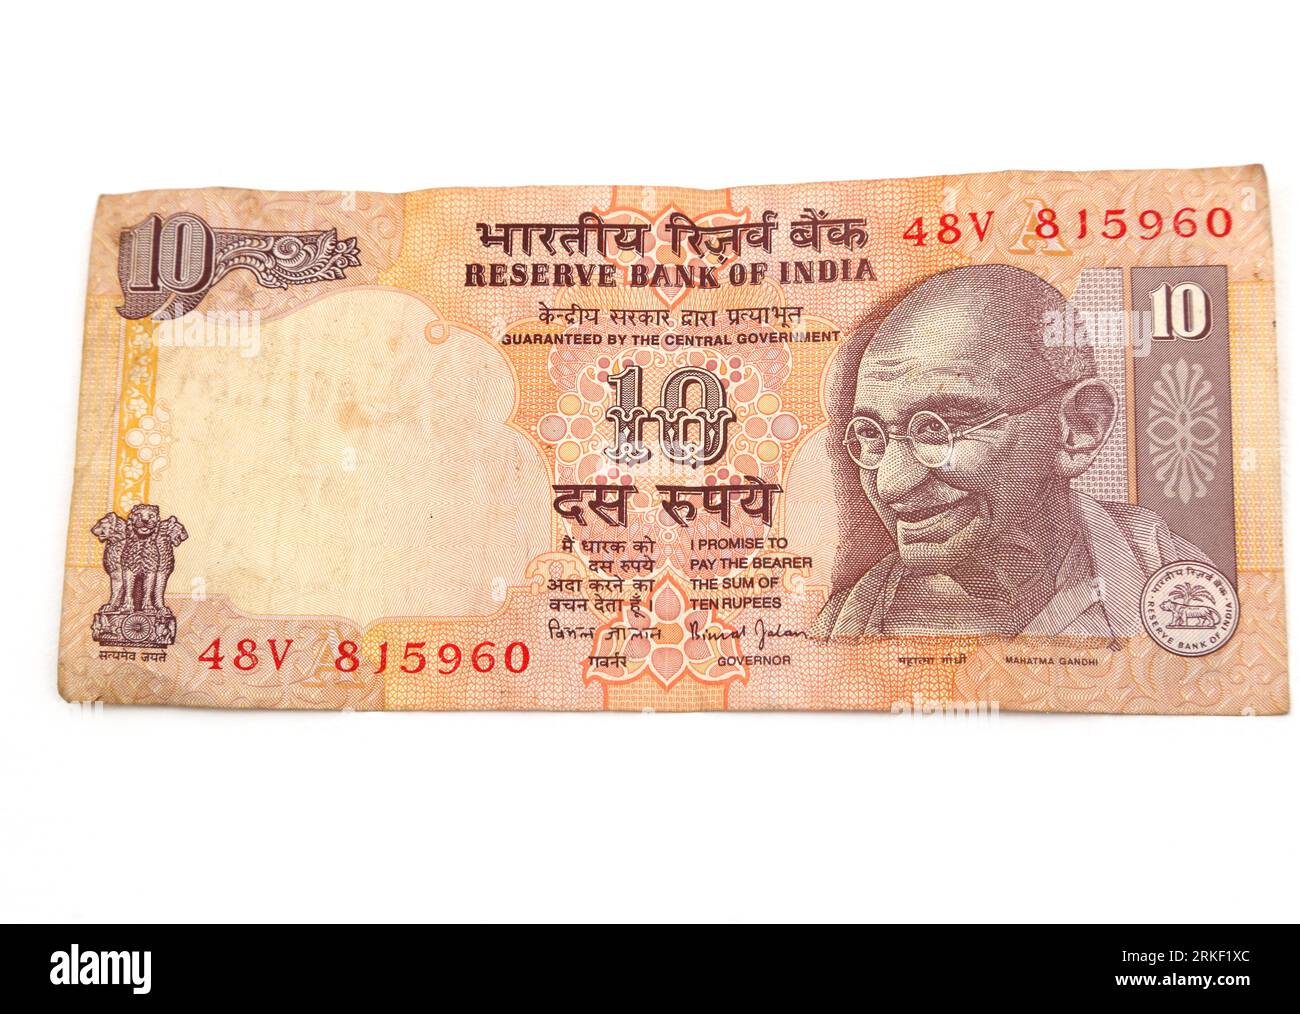 Reserve Bank of India Mahatma Gandhi Series 10 Rupees Banknote Issued 2001- Current Obverse Showing Portrait of Mahatma Gandhi Stock Photo